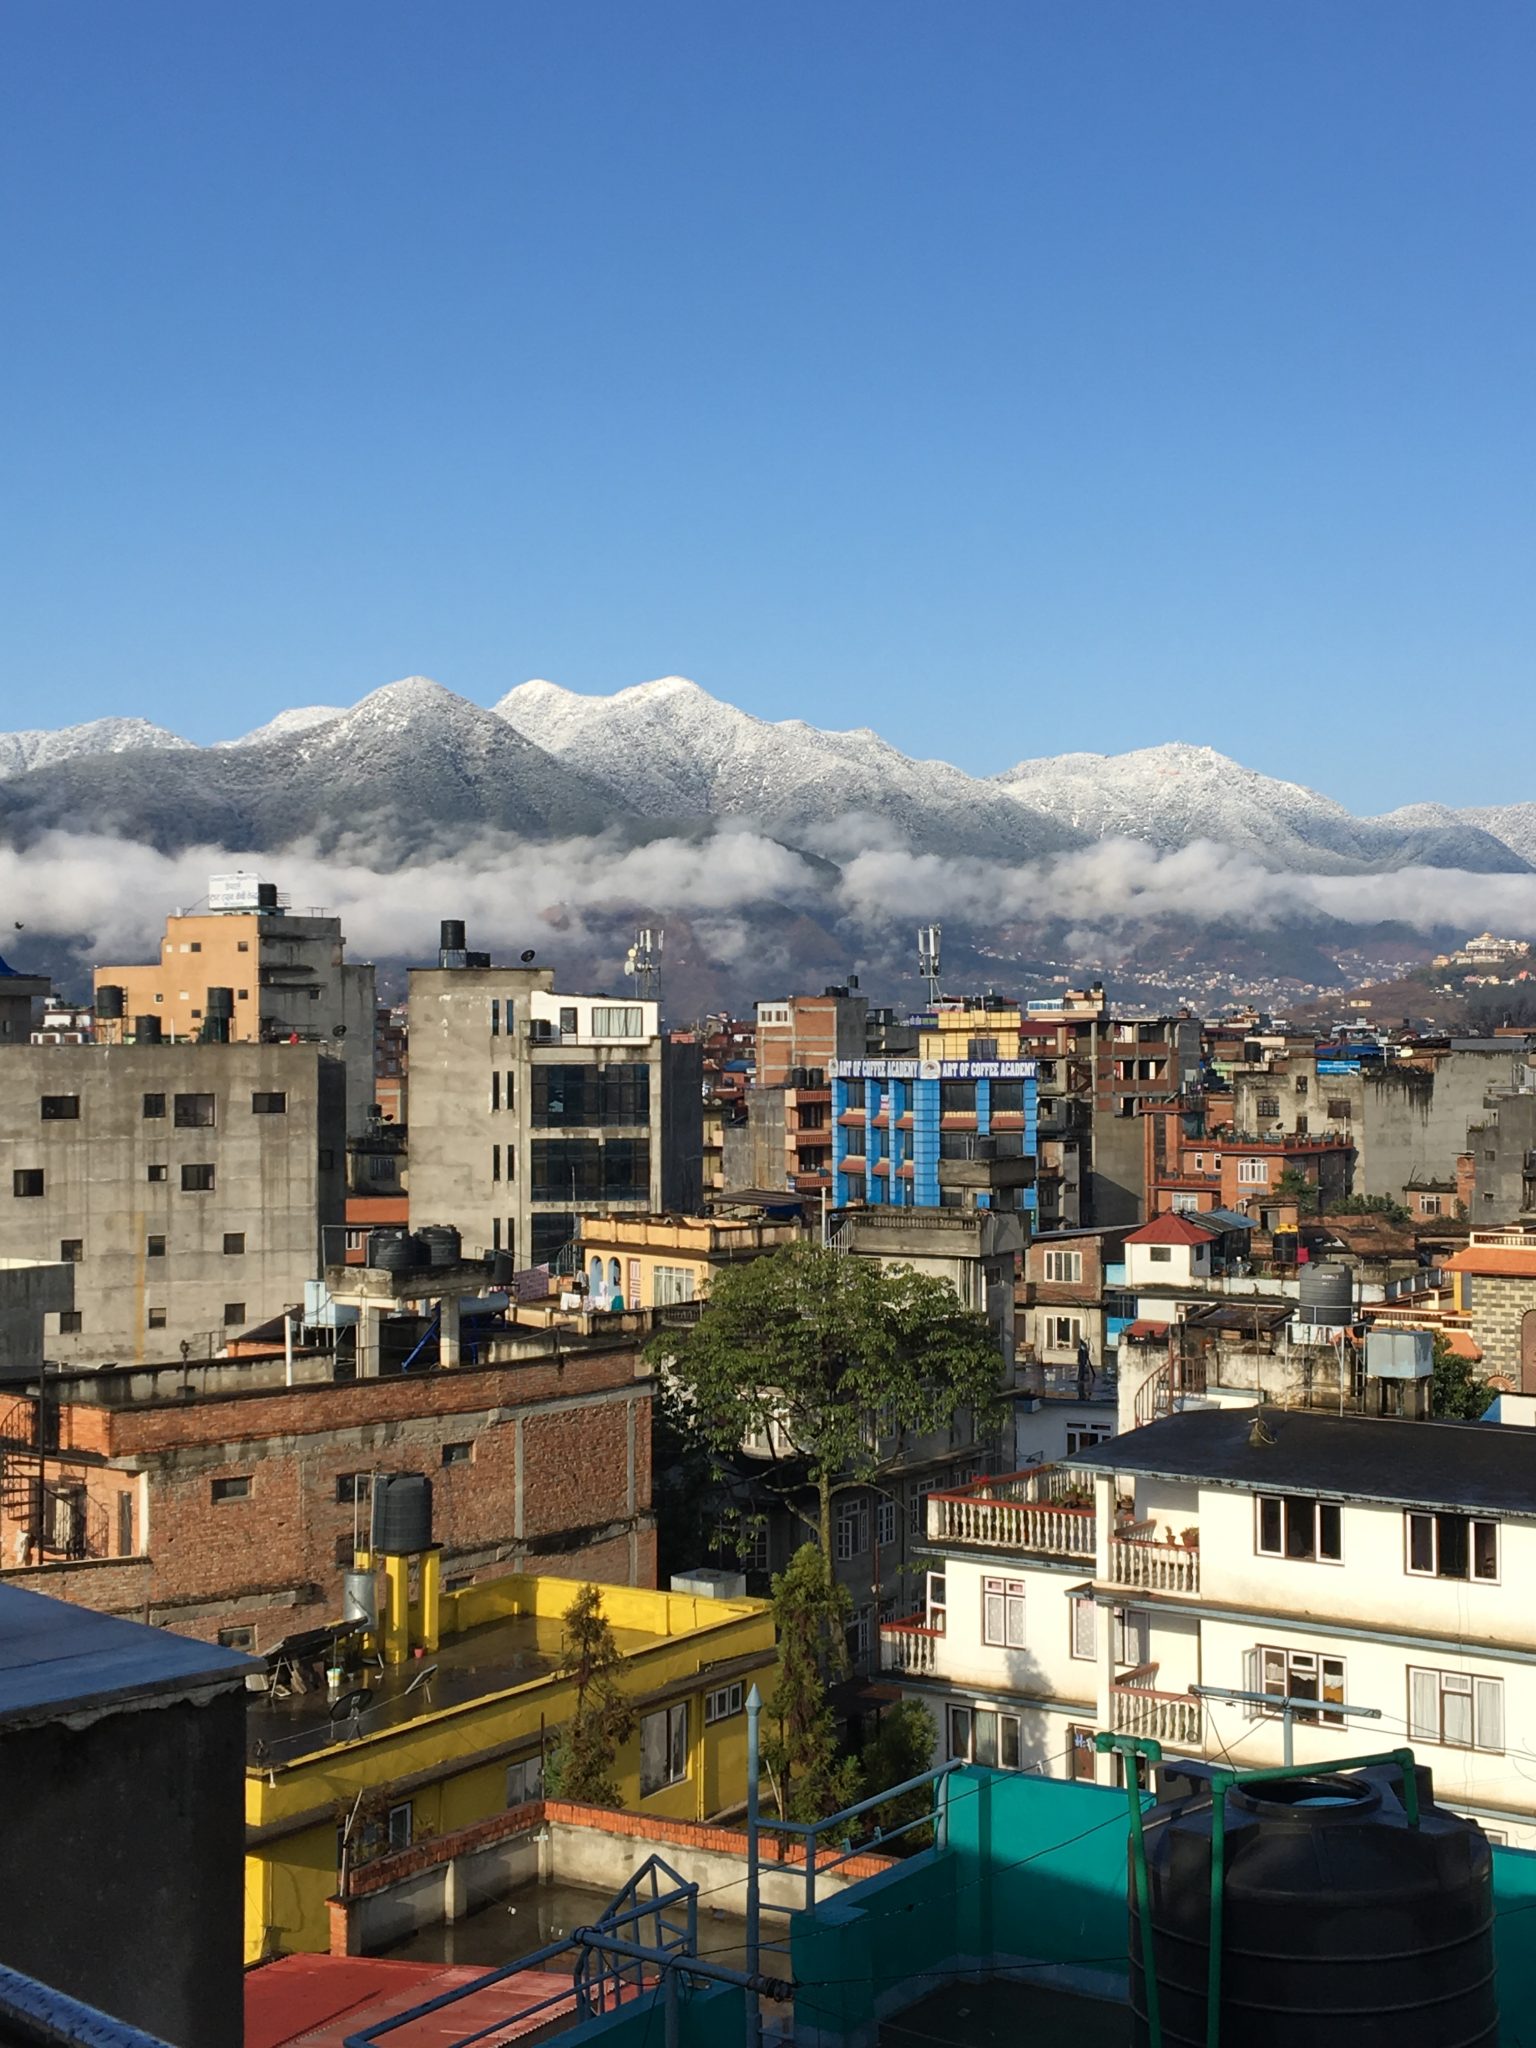 View of snow-capped hills (Chandragiri, Nepal) after heavy rain from the terrace – WorldPhotographyDay22